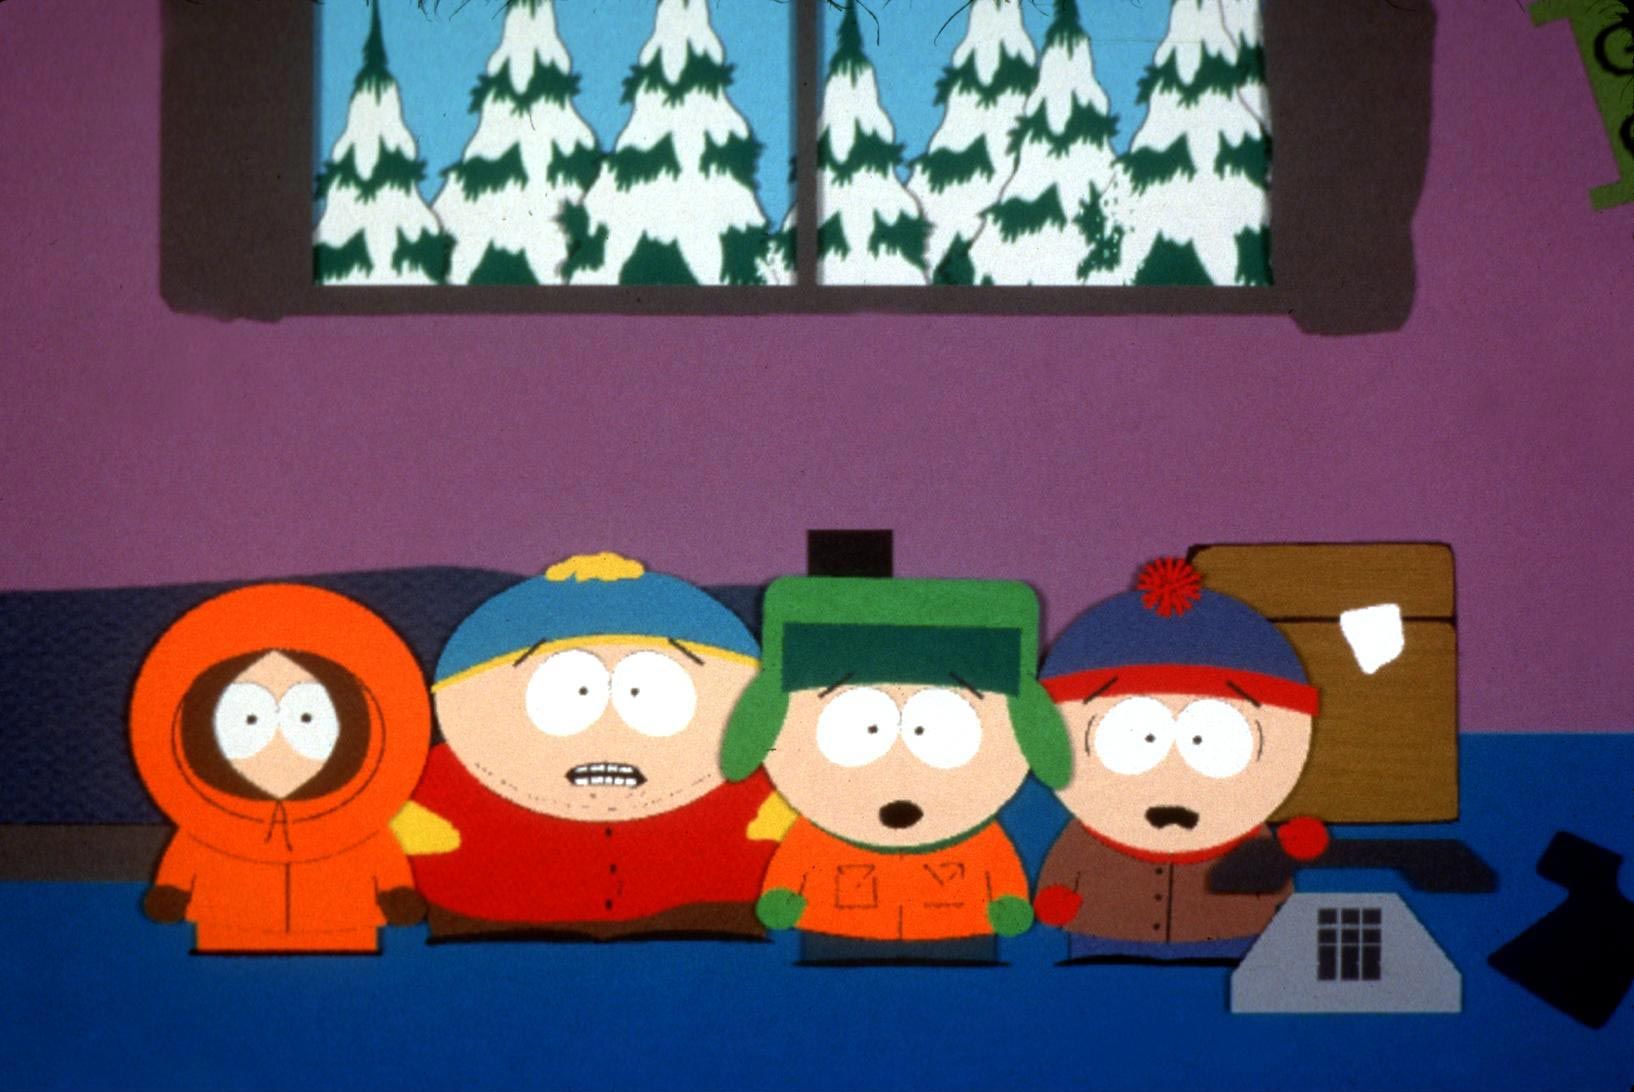 Kenny from 'South Park' reveals face after 10 years